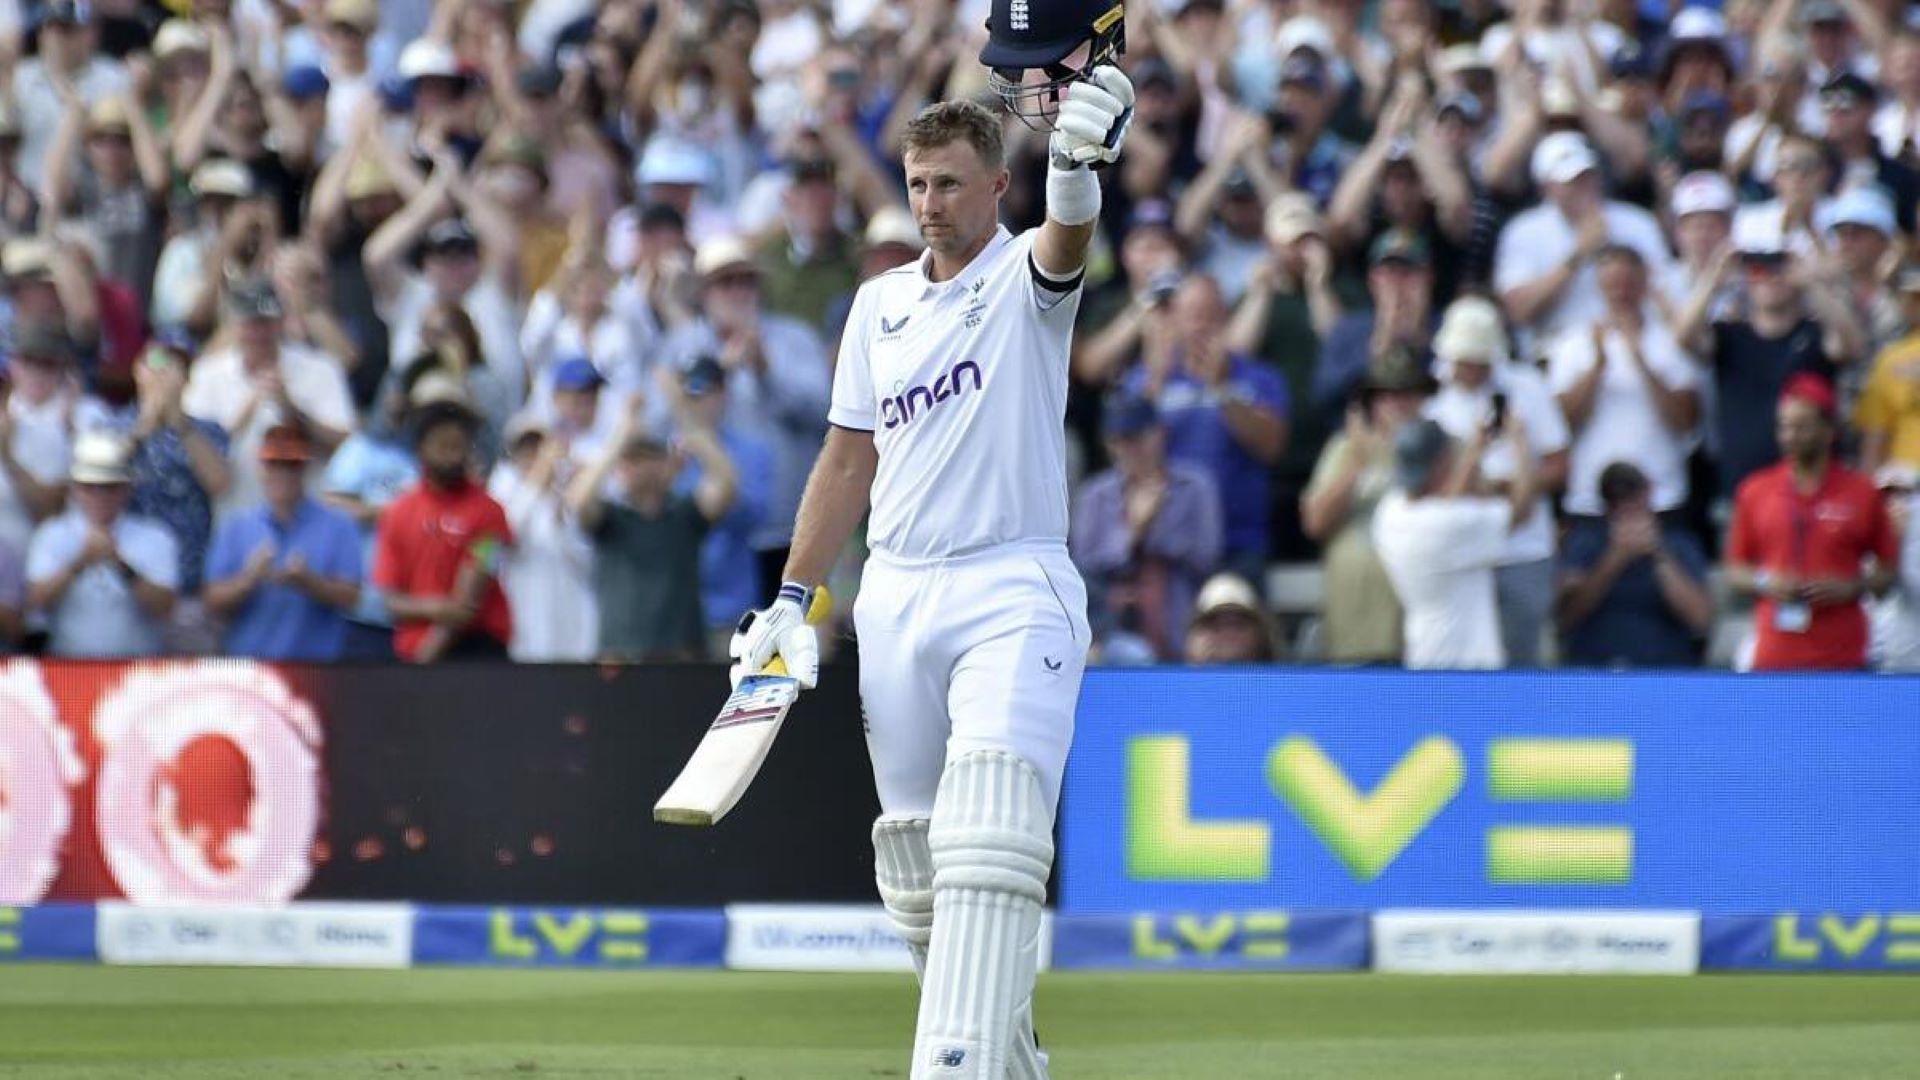 Joe Root stole the show on Day 1 of the 2023 Ashes